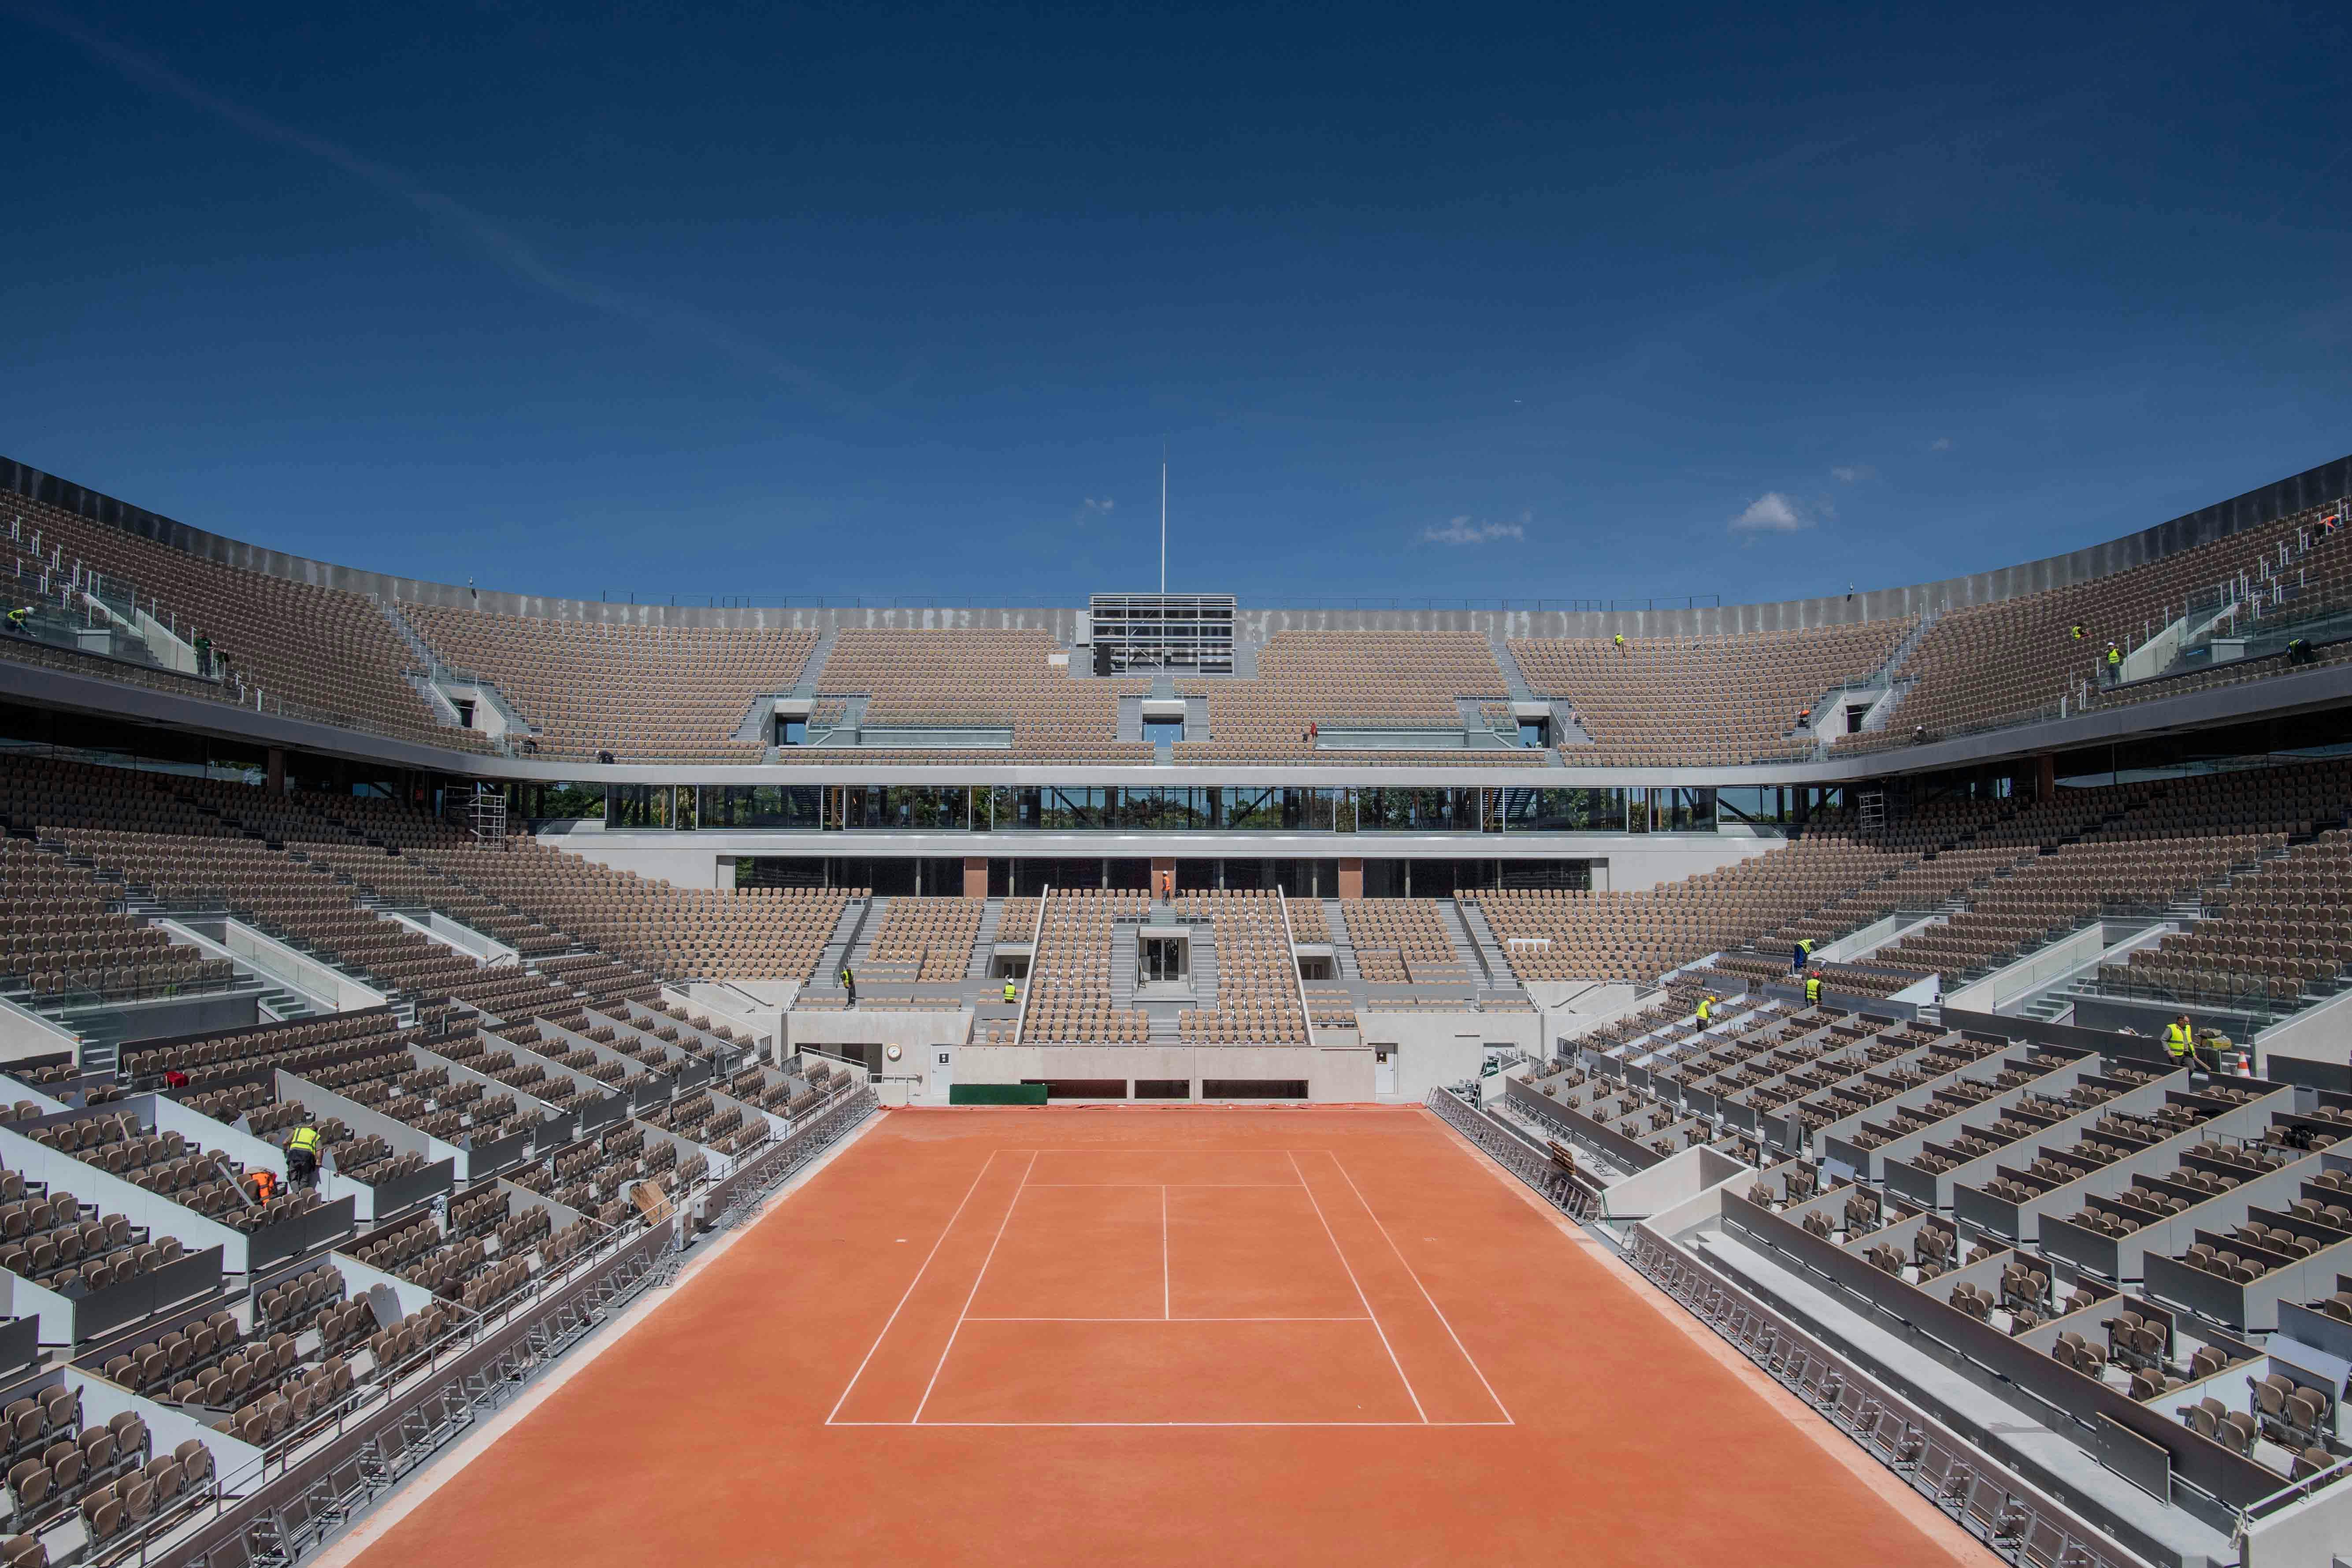 Philippe-Chatrier Court after RG19.